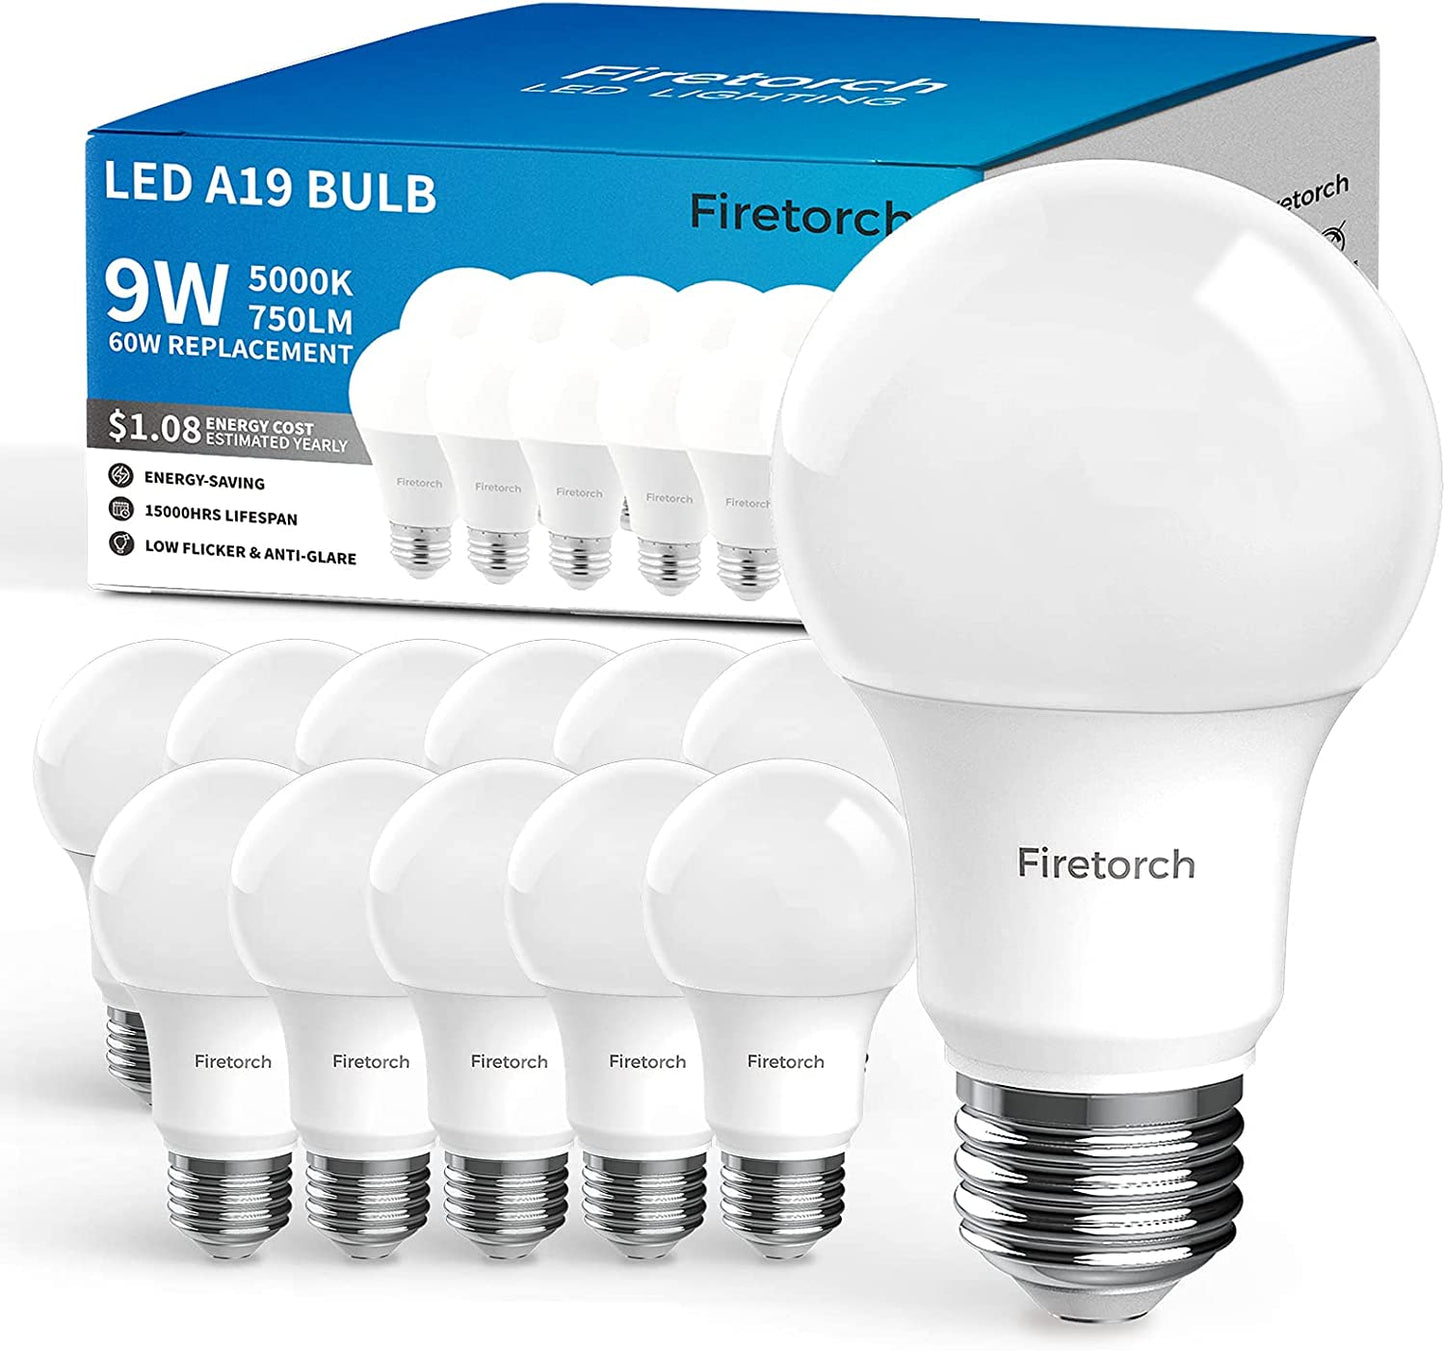 Firetorch A19 Led Bulb,9 W 60W Equivalent, E26 Led Light Bulbs Standard Replacement Bulb 750 Lumen,Non-Dimmable, UL Listed (5000K,4 Pack)